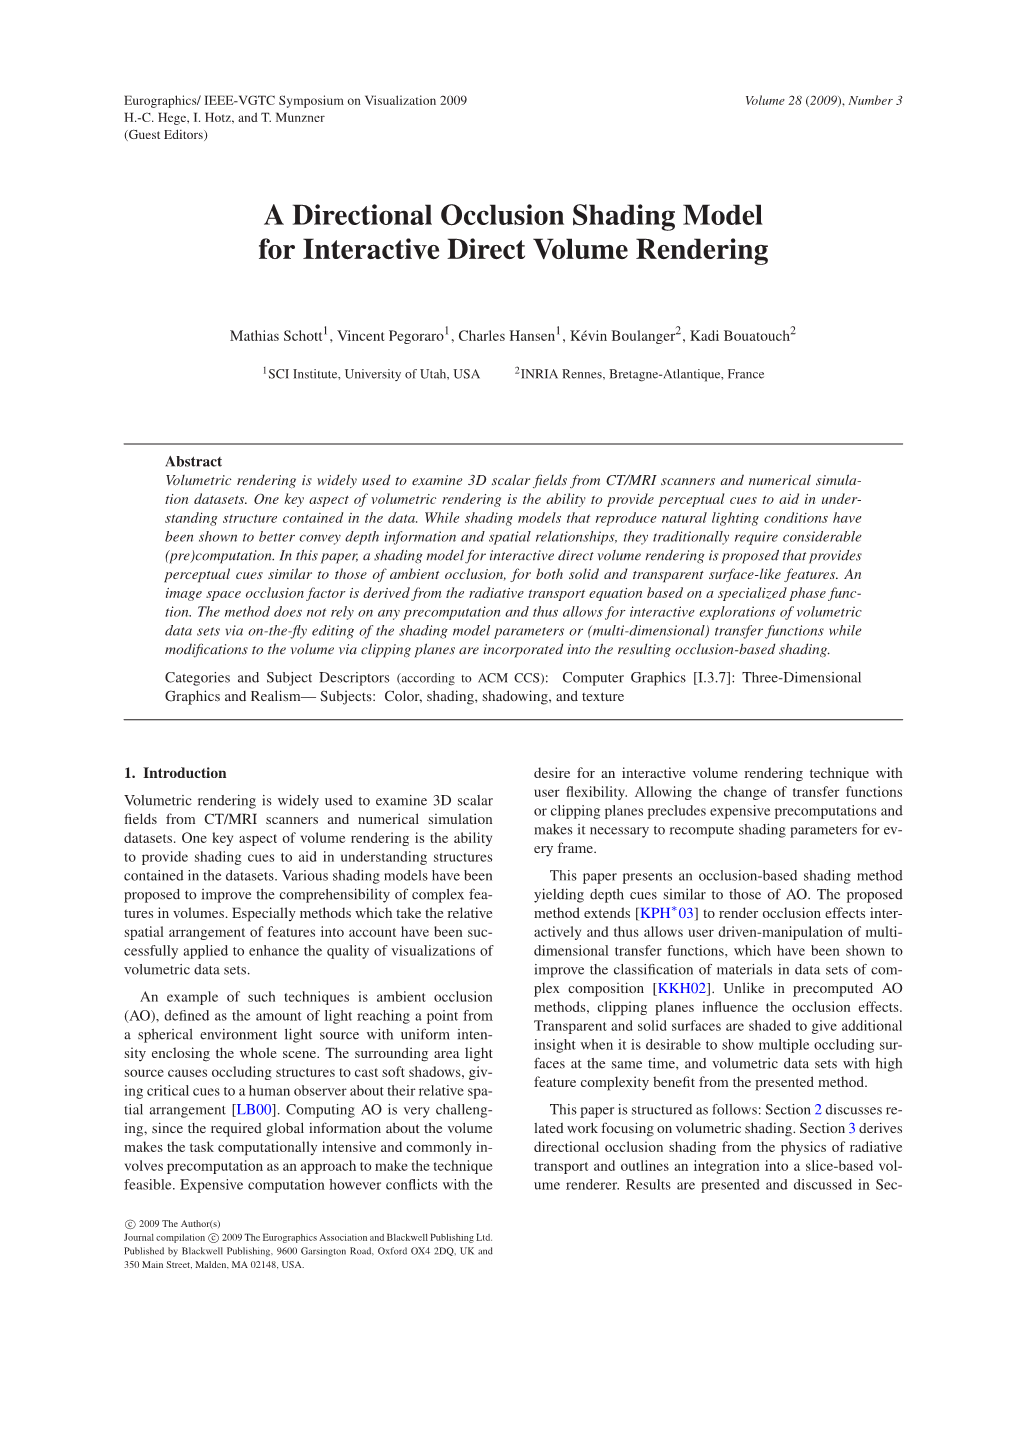 A Directional Occlusion Shading Model for Interactive Direct Volume Rendering